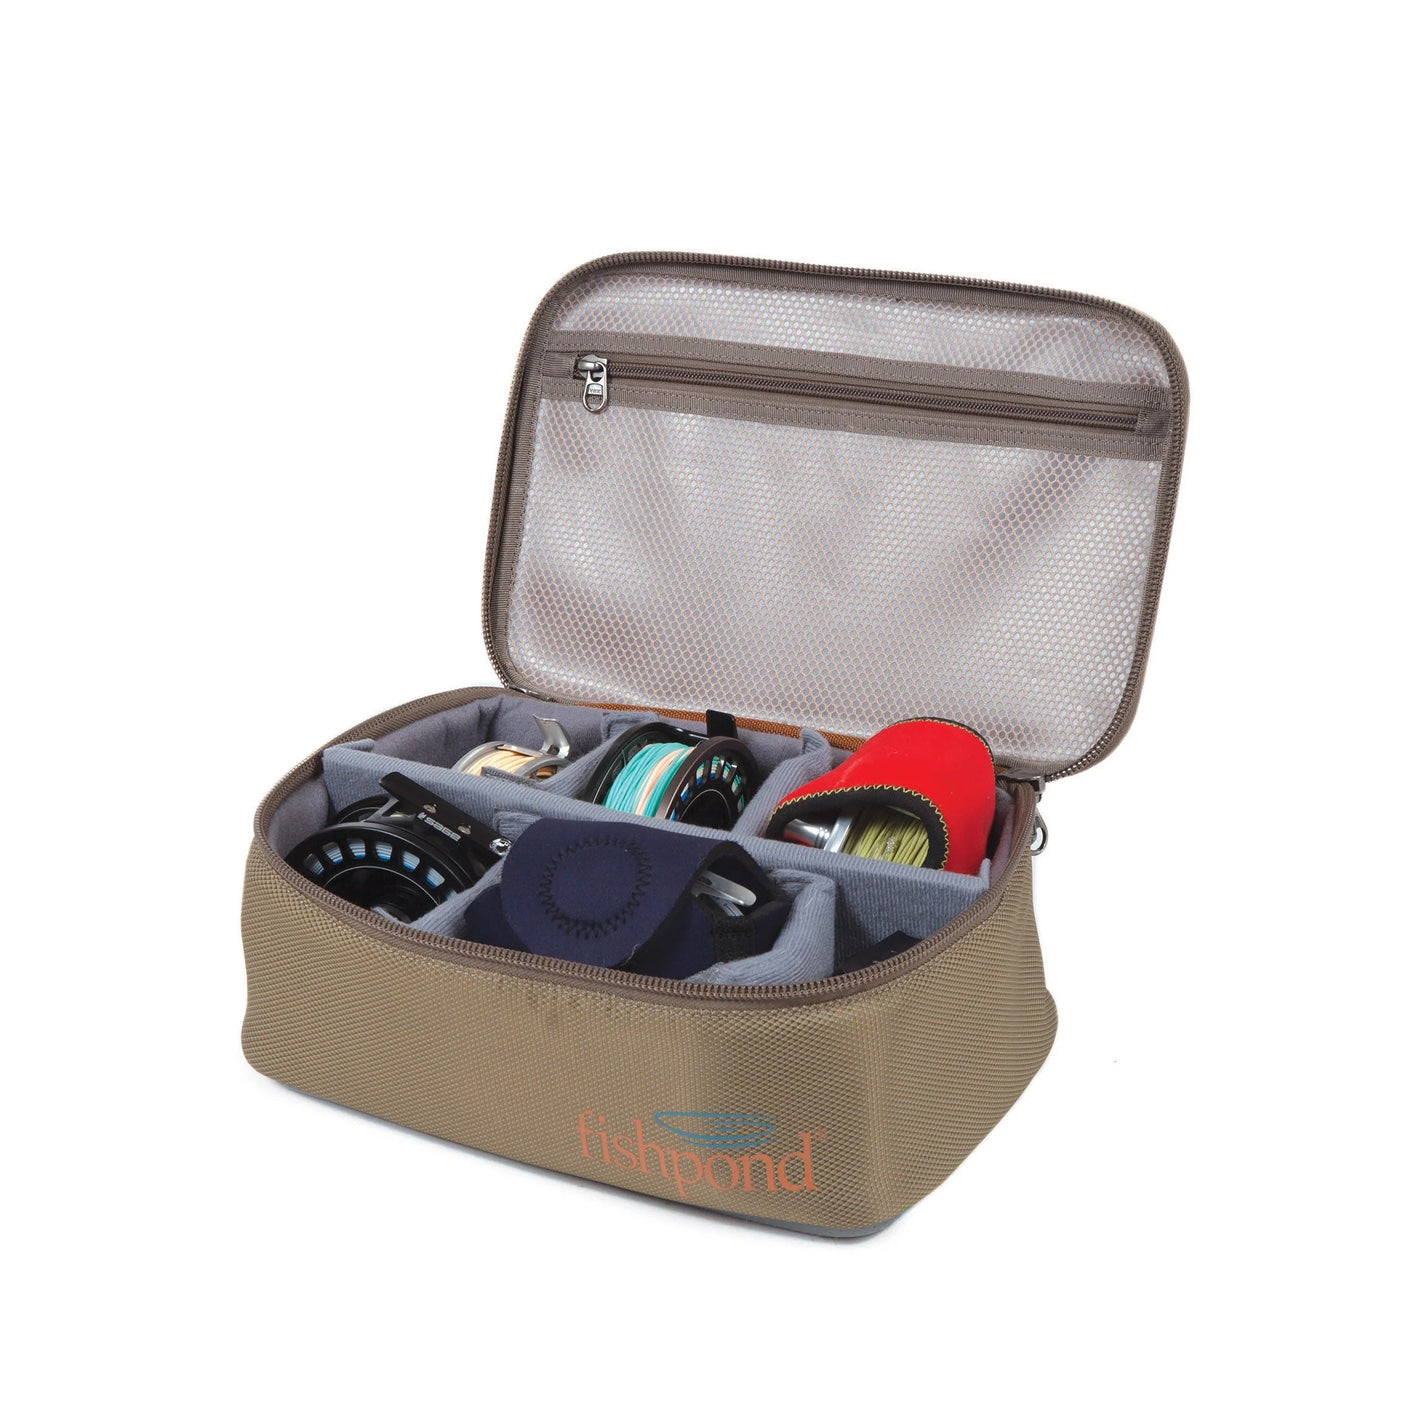 Fishpond Ripple Reel Case - Large - Iron Bow Fly Shop